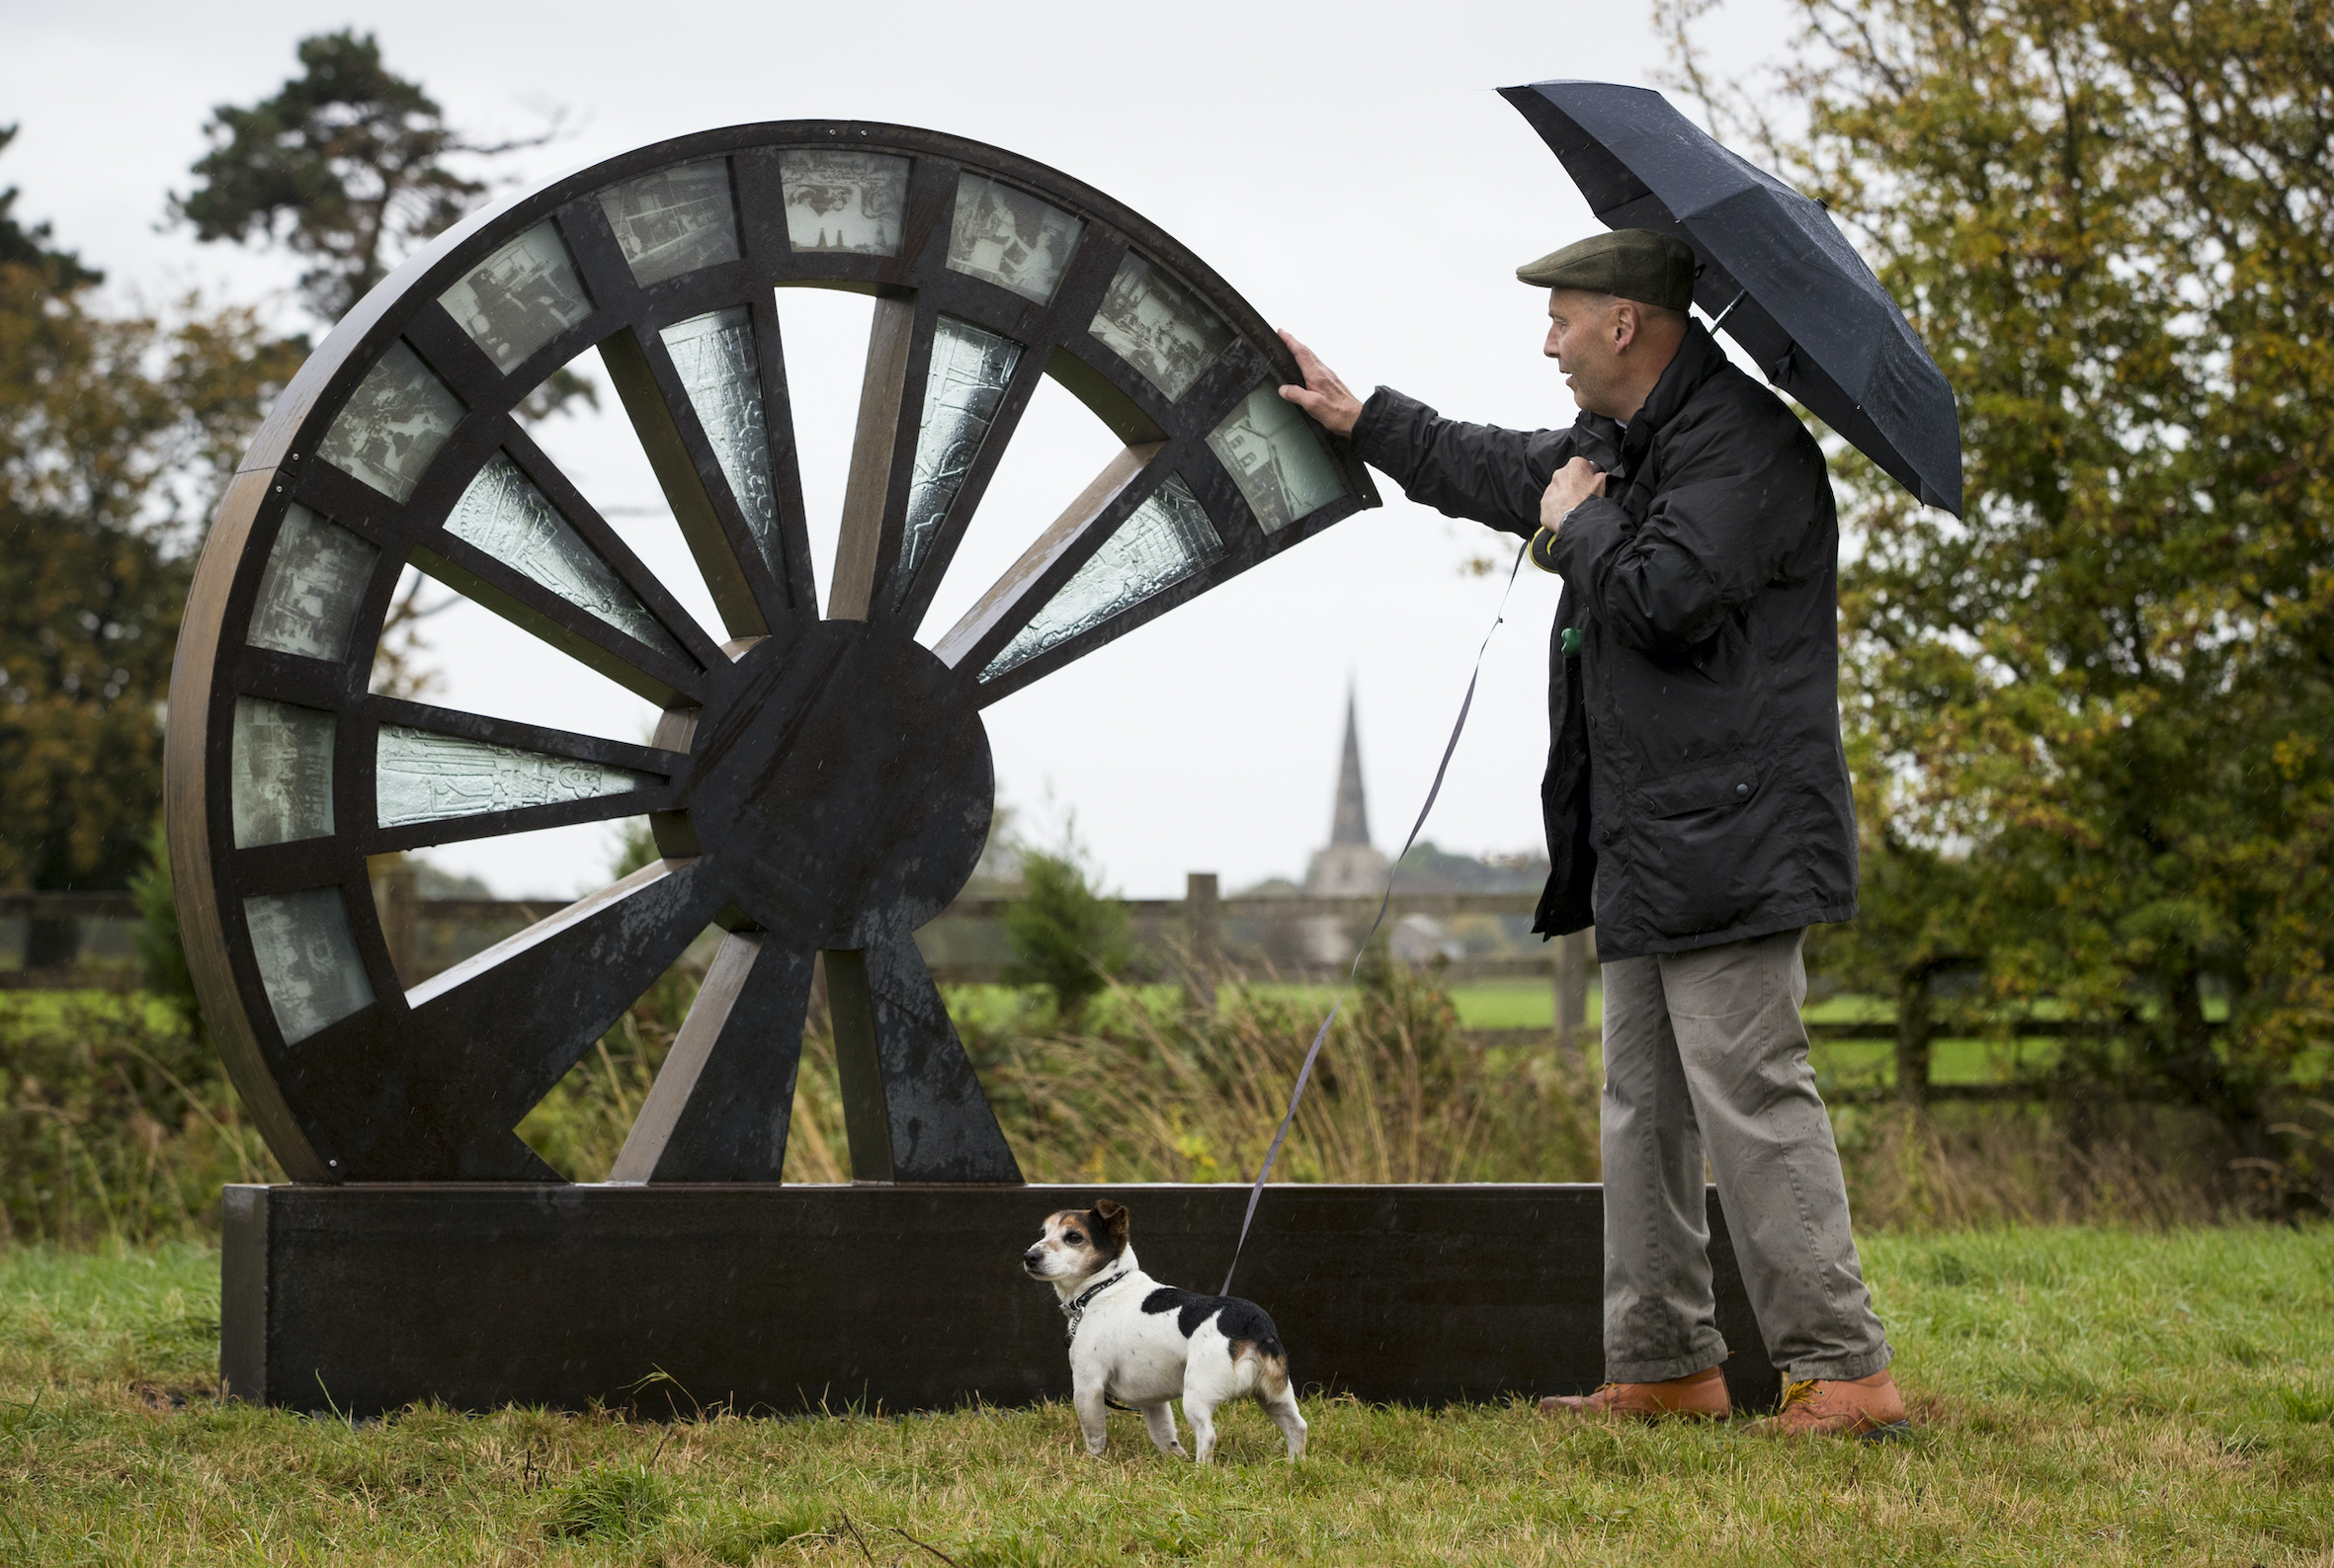 A man and his dog stand next to a wheel shaped sculpture